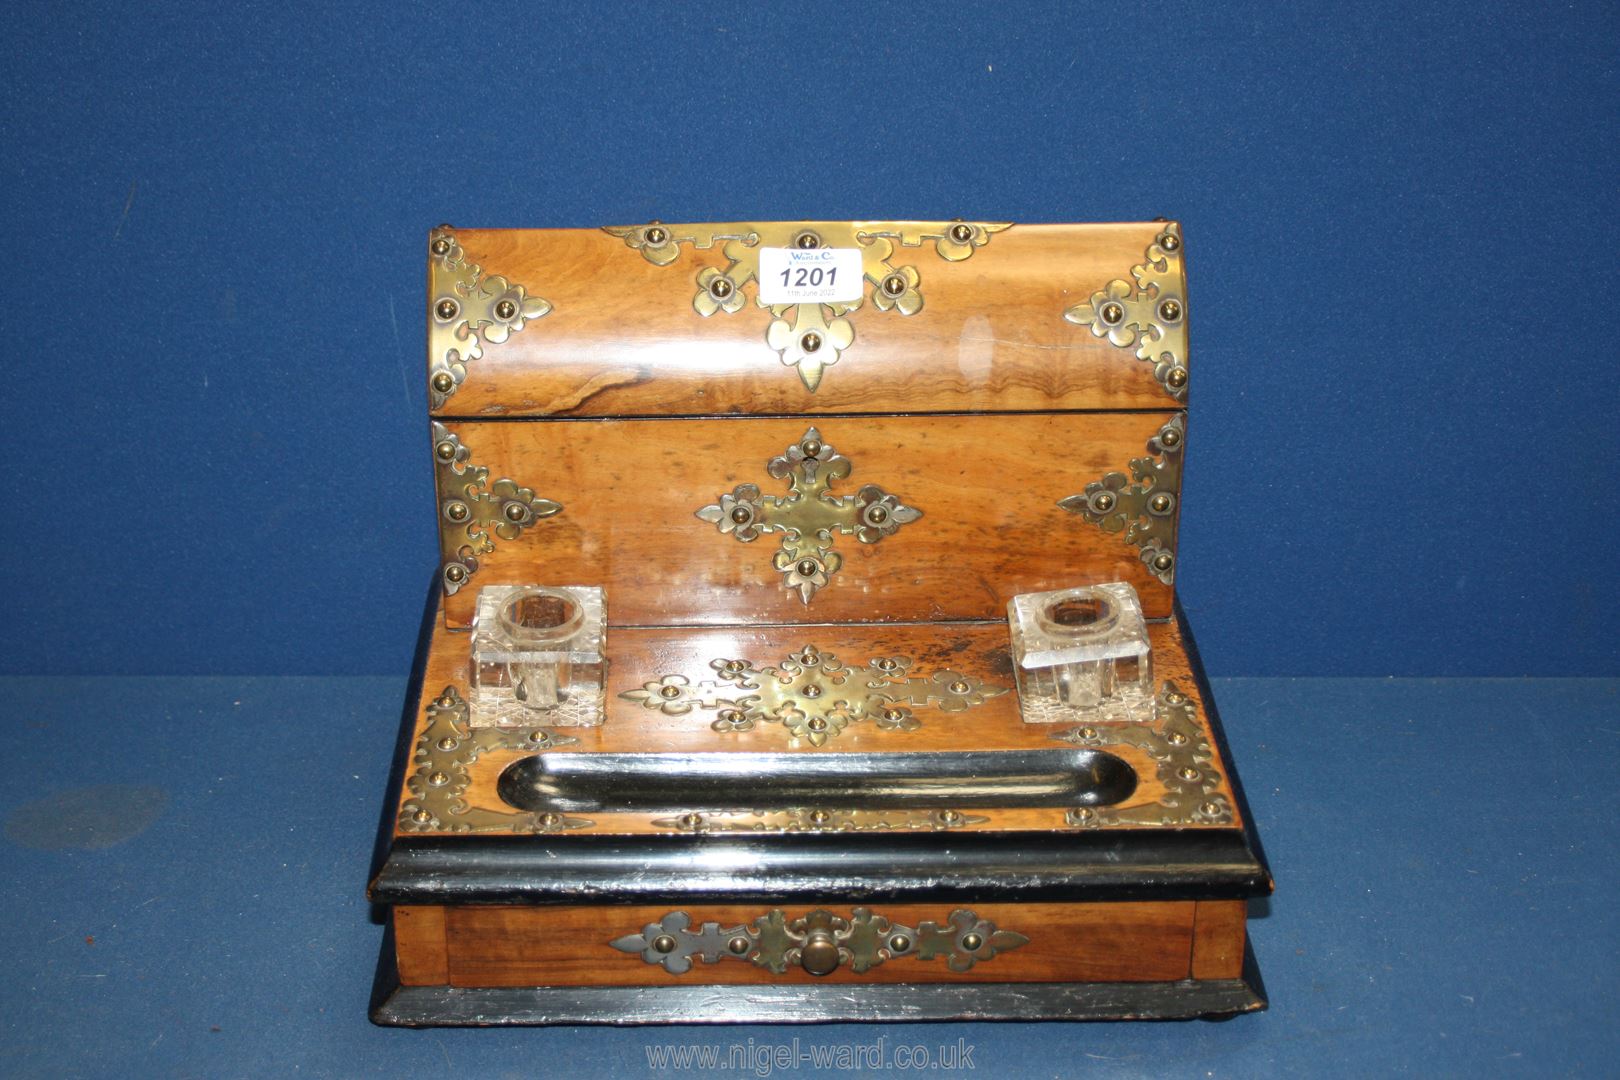 A walnut veneered table top Stationery Box with ornate brass embellishment,